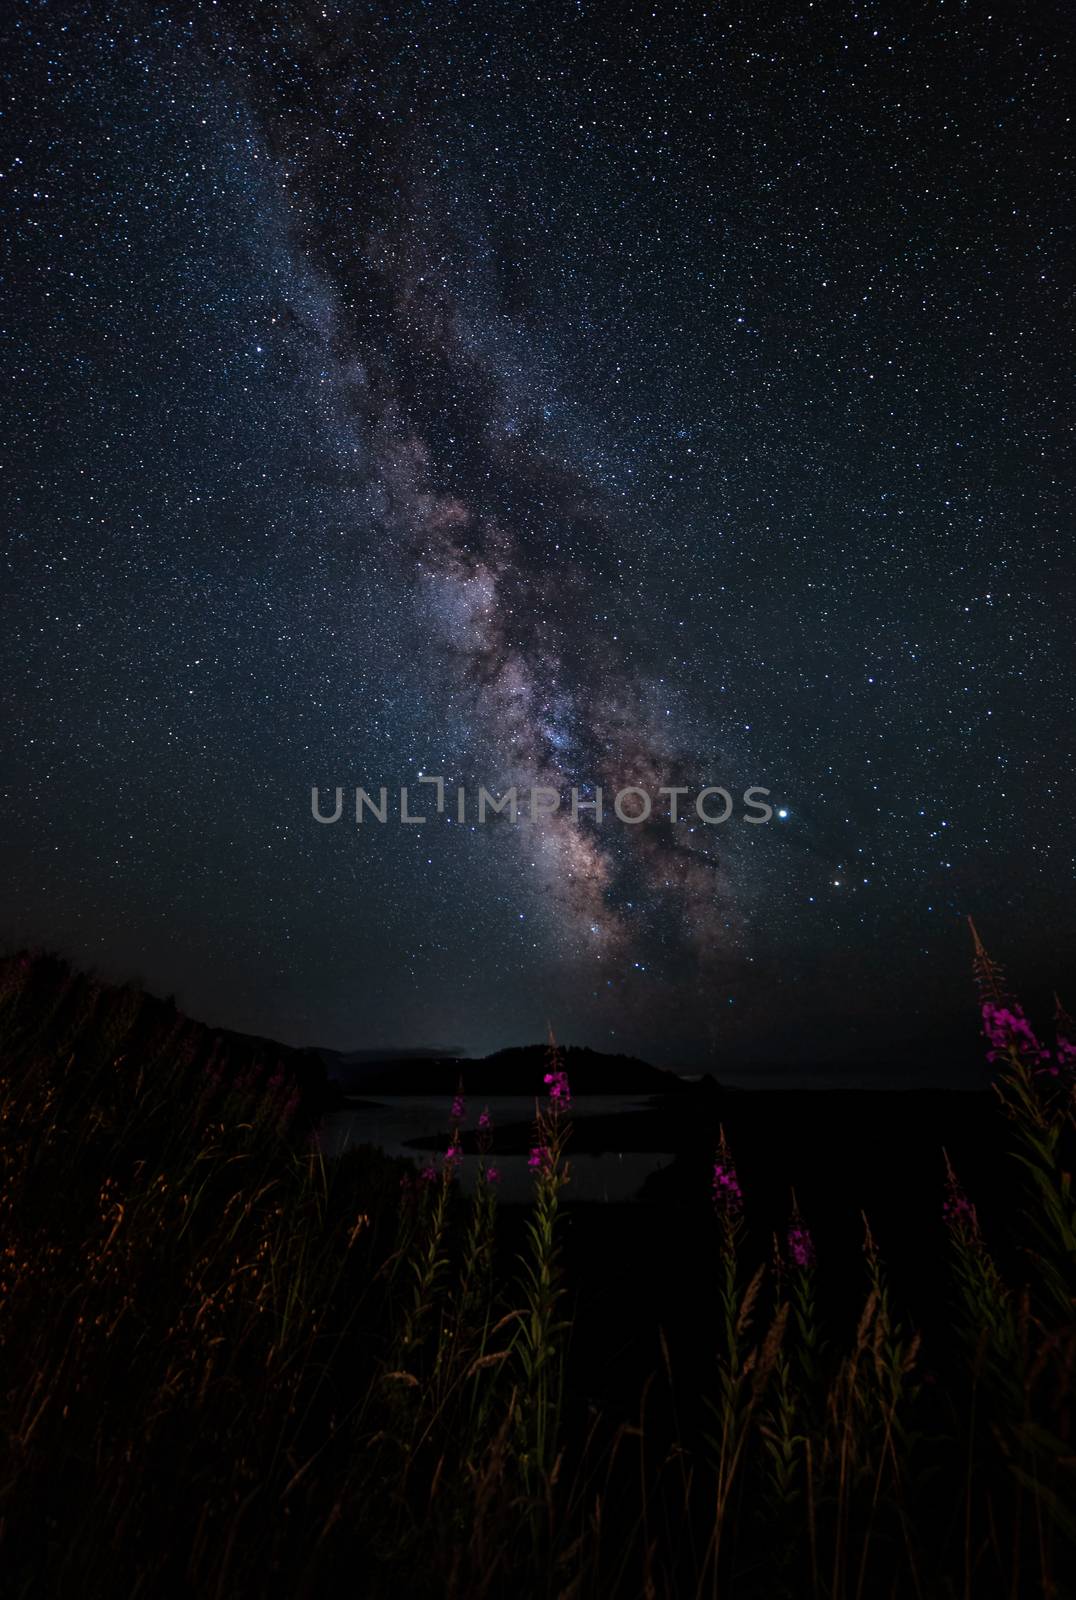 The Milky Way as Seen from Northern California, USA by backyard_photography